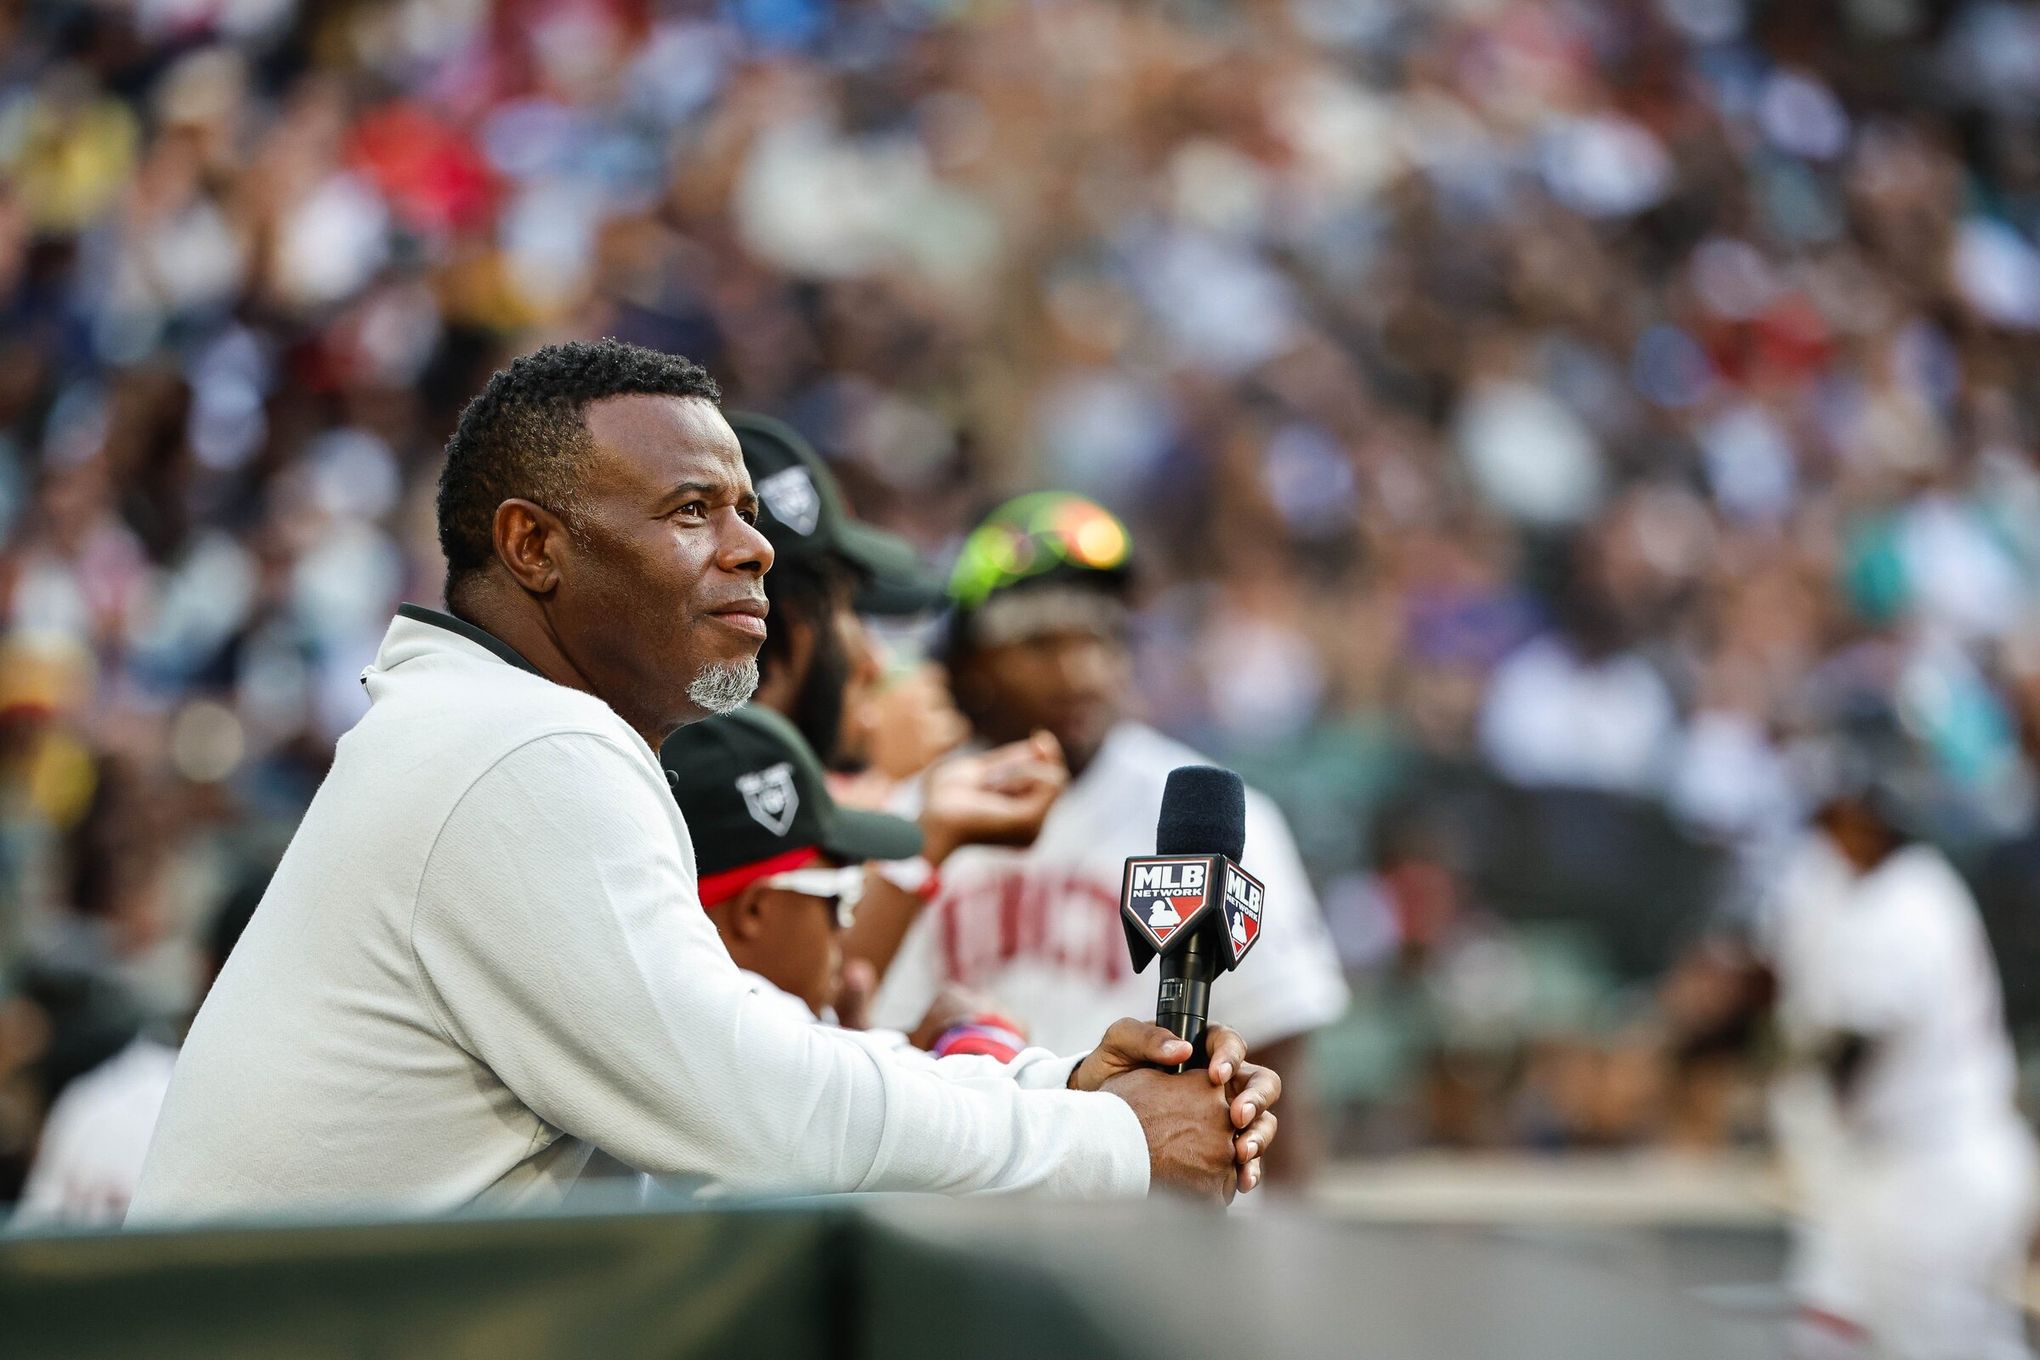 A Look Back on When Two-Time MLB All-Star Vince Coleman Threw a